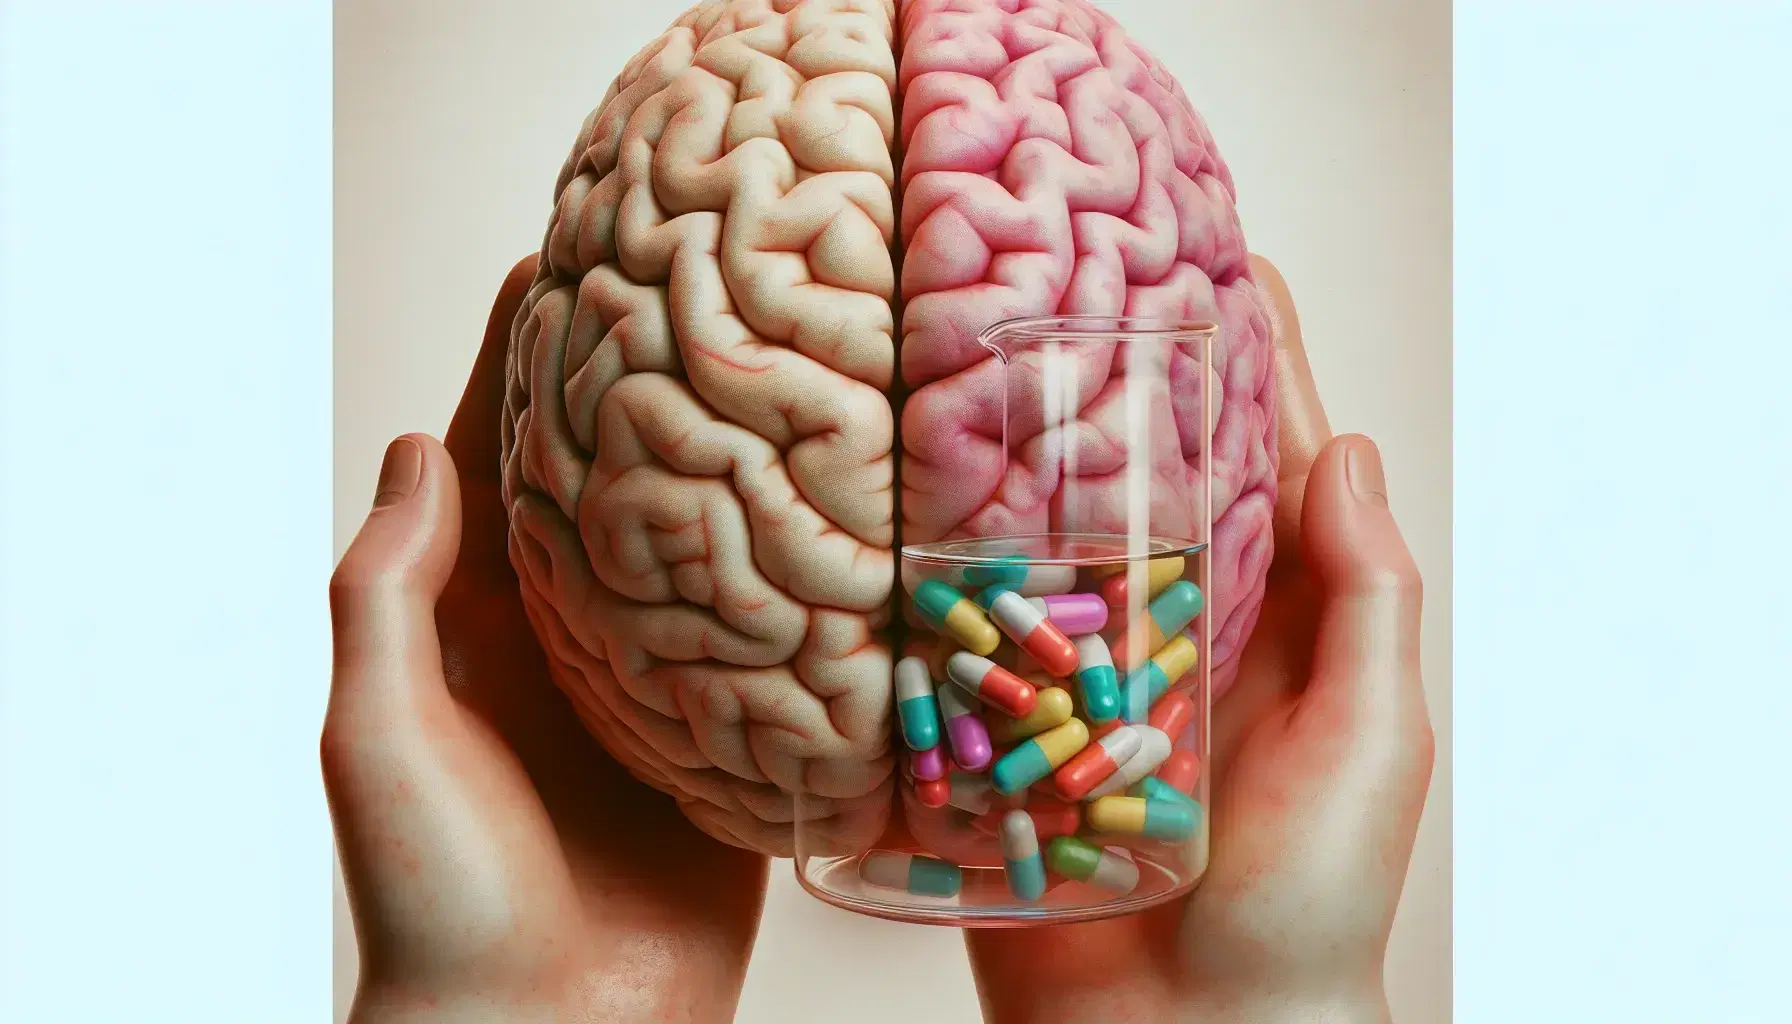 Detailed side view of a human brain in shades of pink and beige, hands supporting it and test tube with colorful pills symbol of addiction.